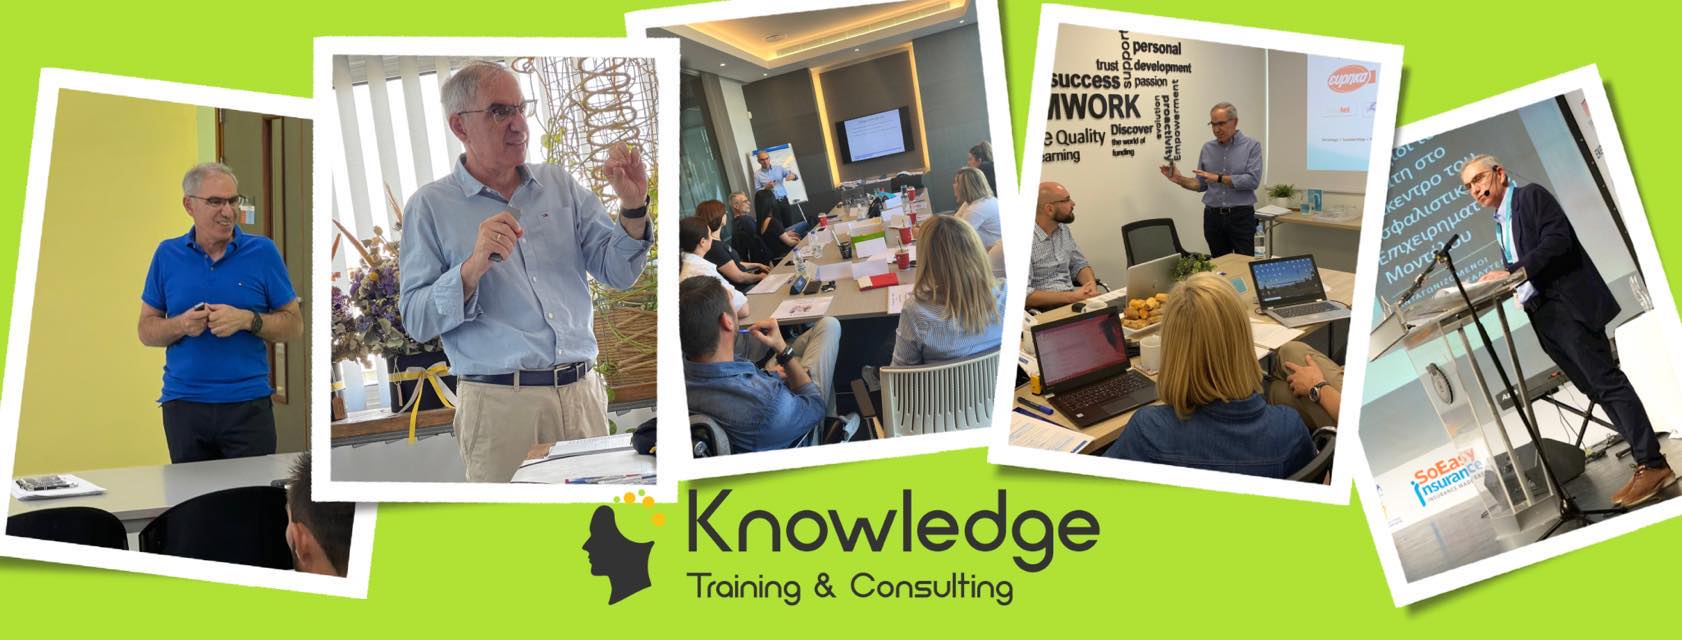 Knowledge Training & Consulting